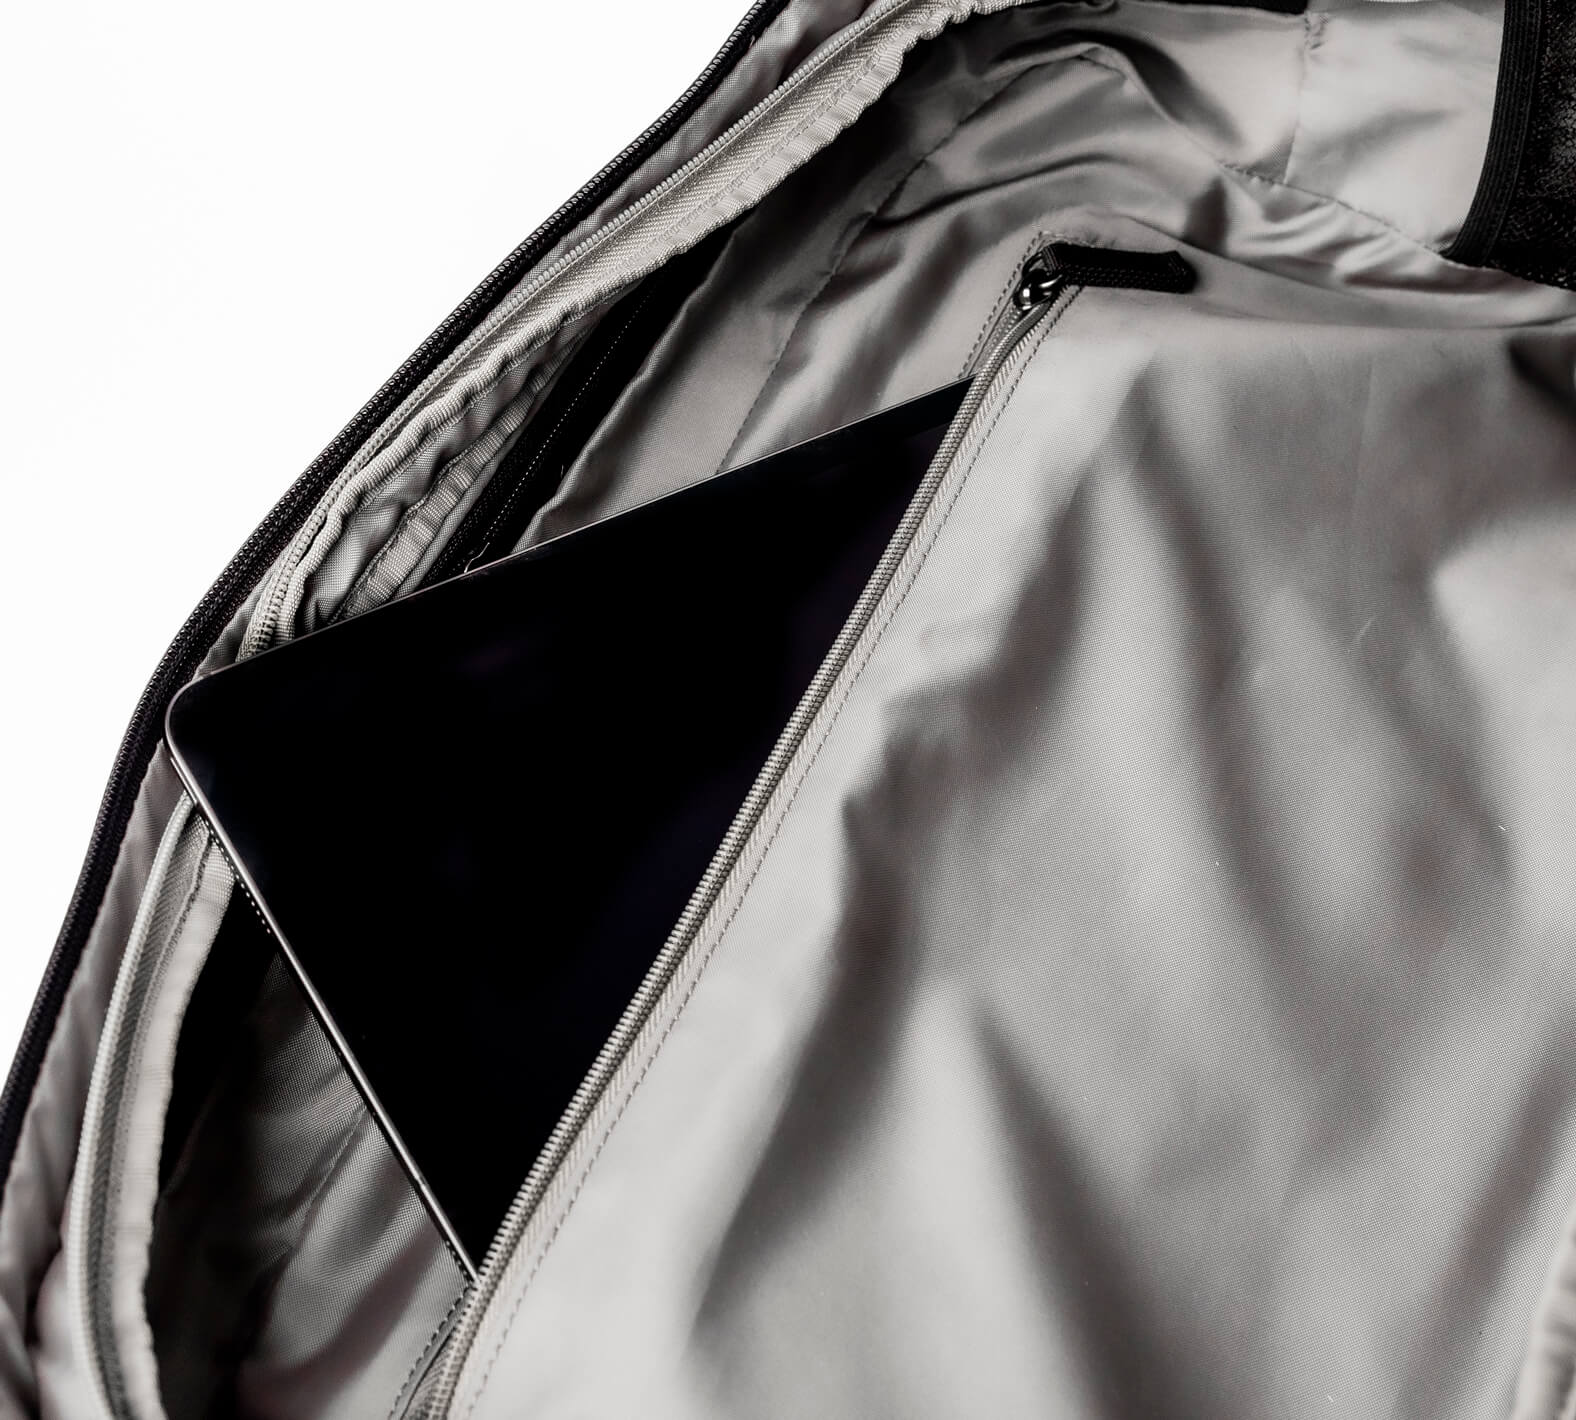 The interior of the bag features pockets in the lining to store any important documents or slimmer items.